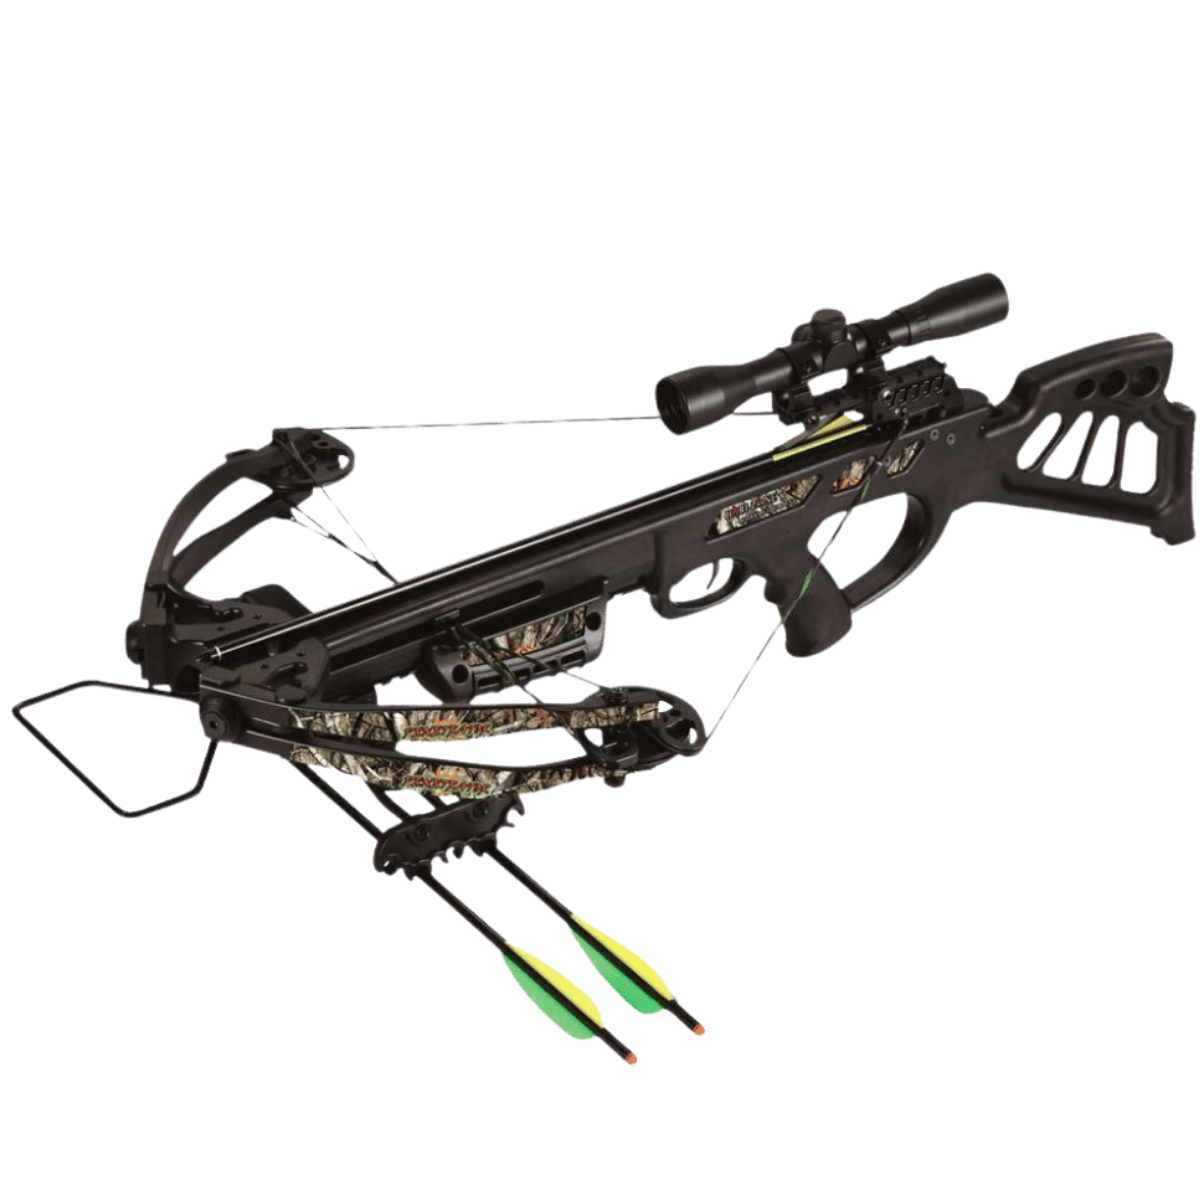 Hori-Zone Premium Penetrator Compound Crossbow Package 340fps - Fast UK Shipping | Tactical Archery UK